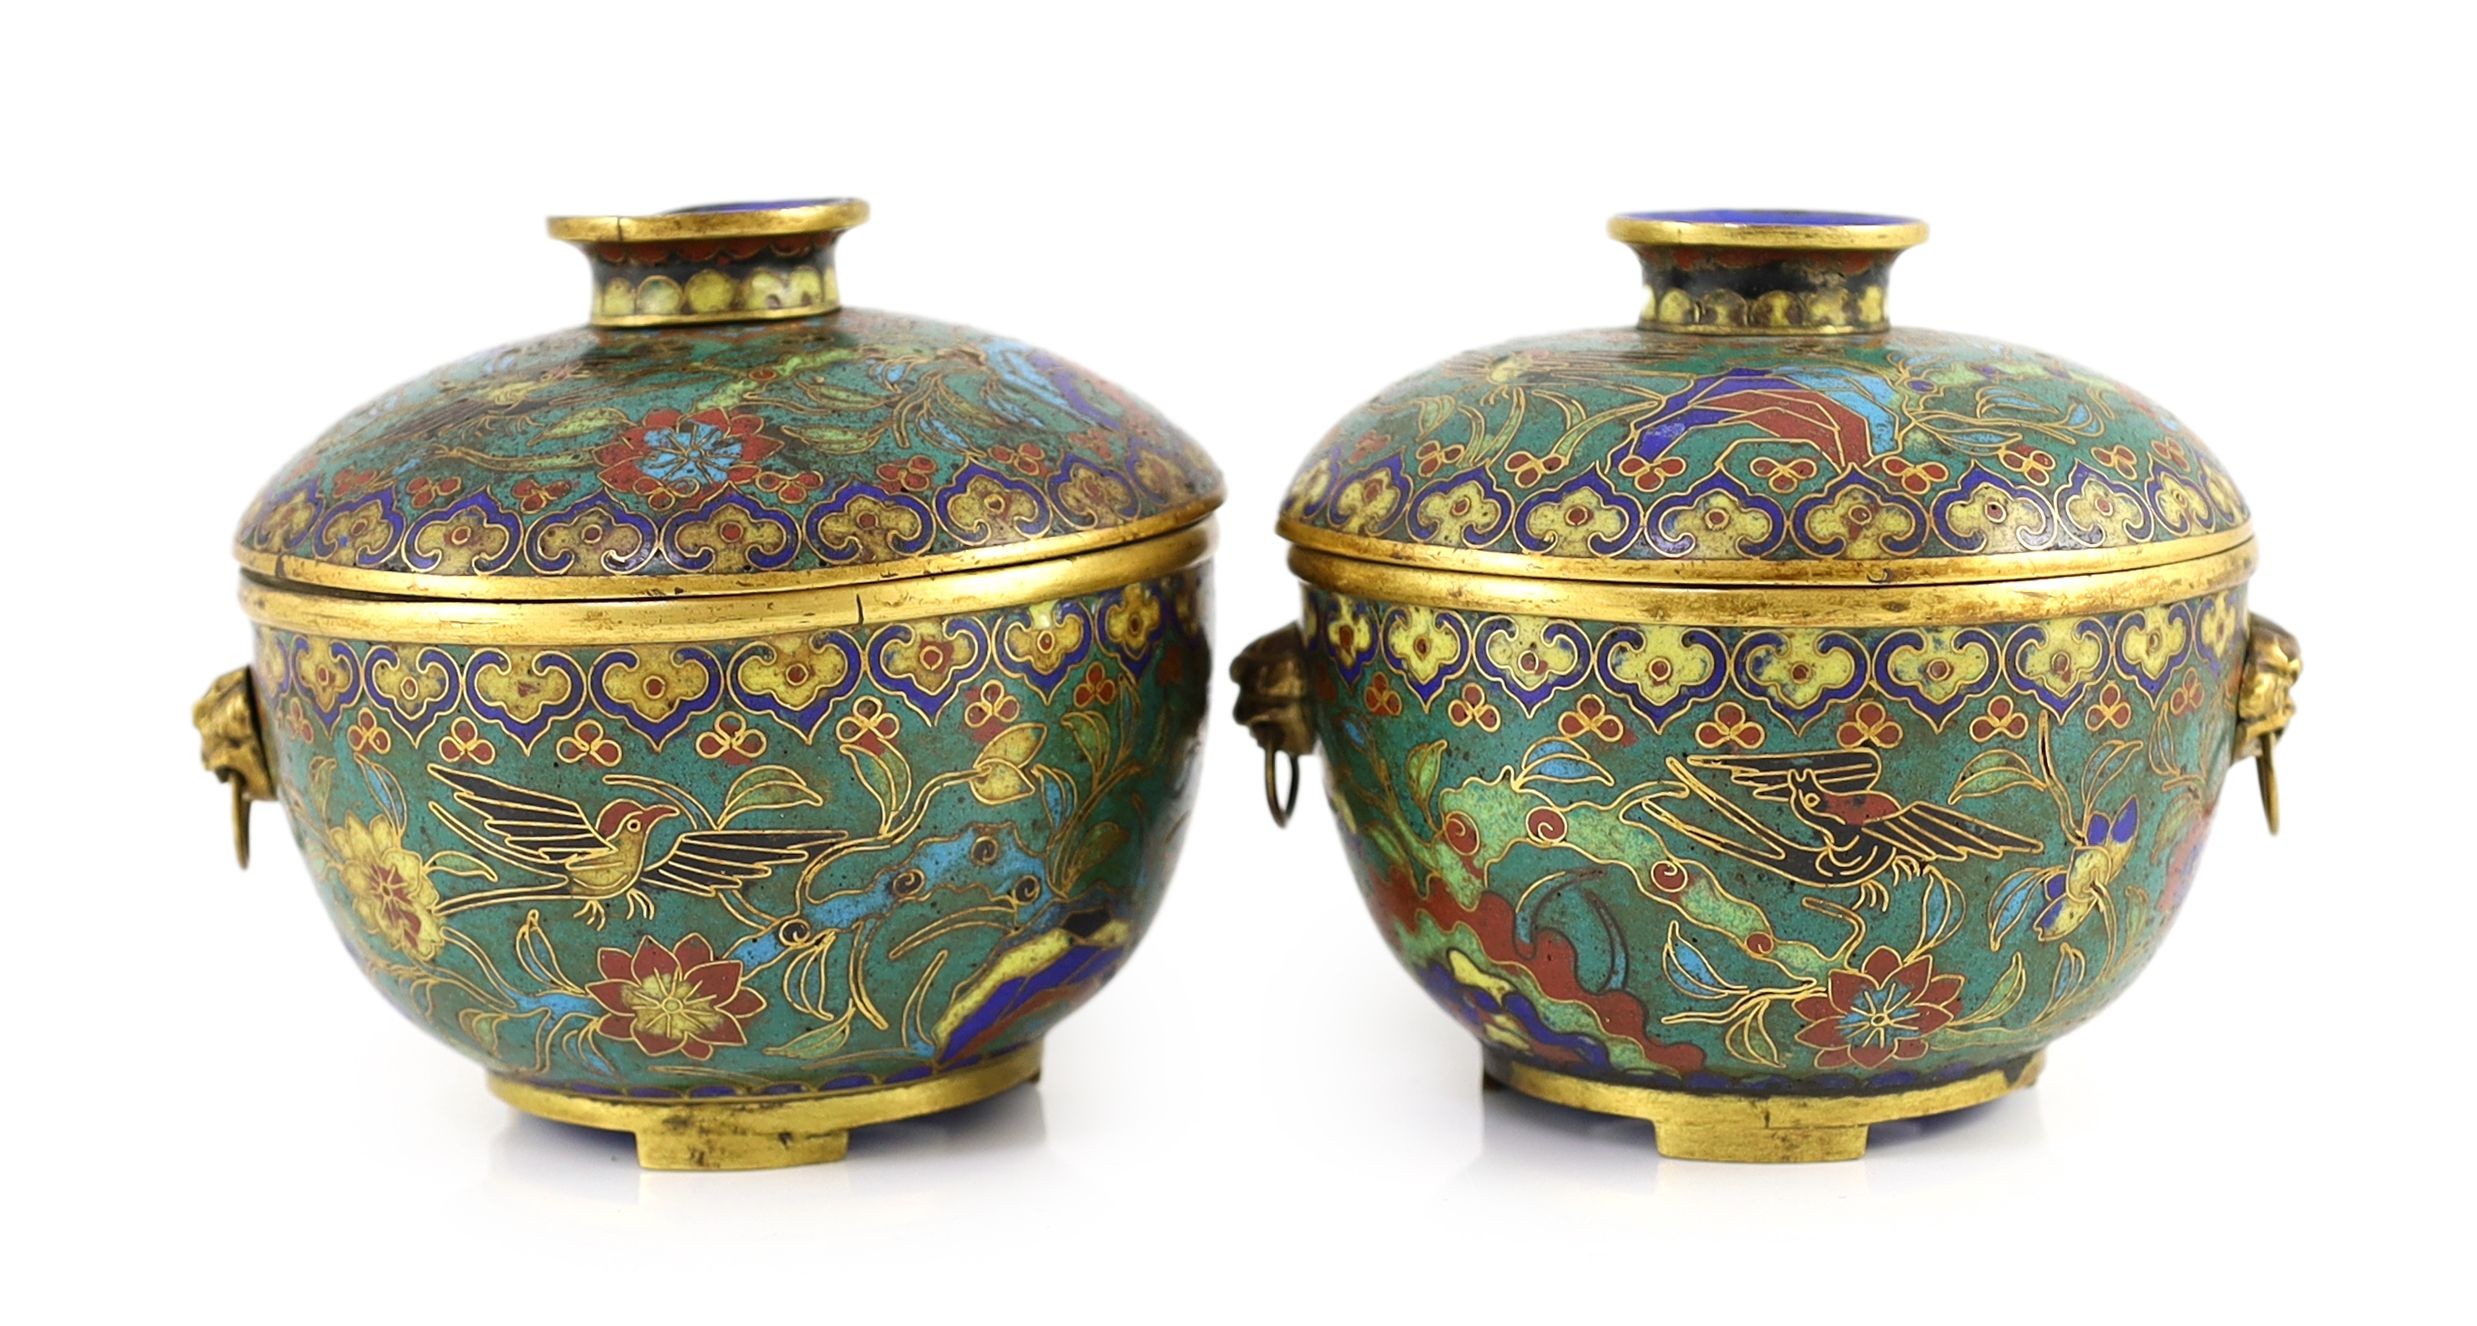 A pair of Chinese cloisonné enamel jars and covers, 18th/19th century 15.2 cm wide, one handle lacking